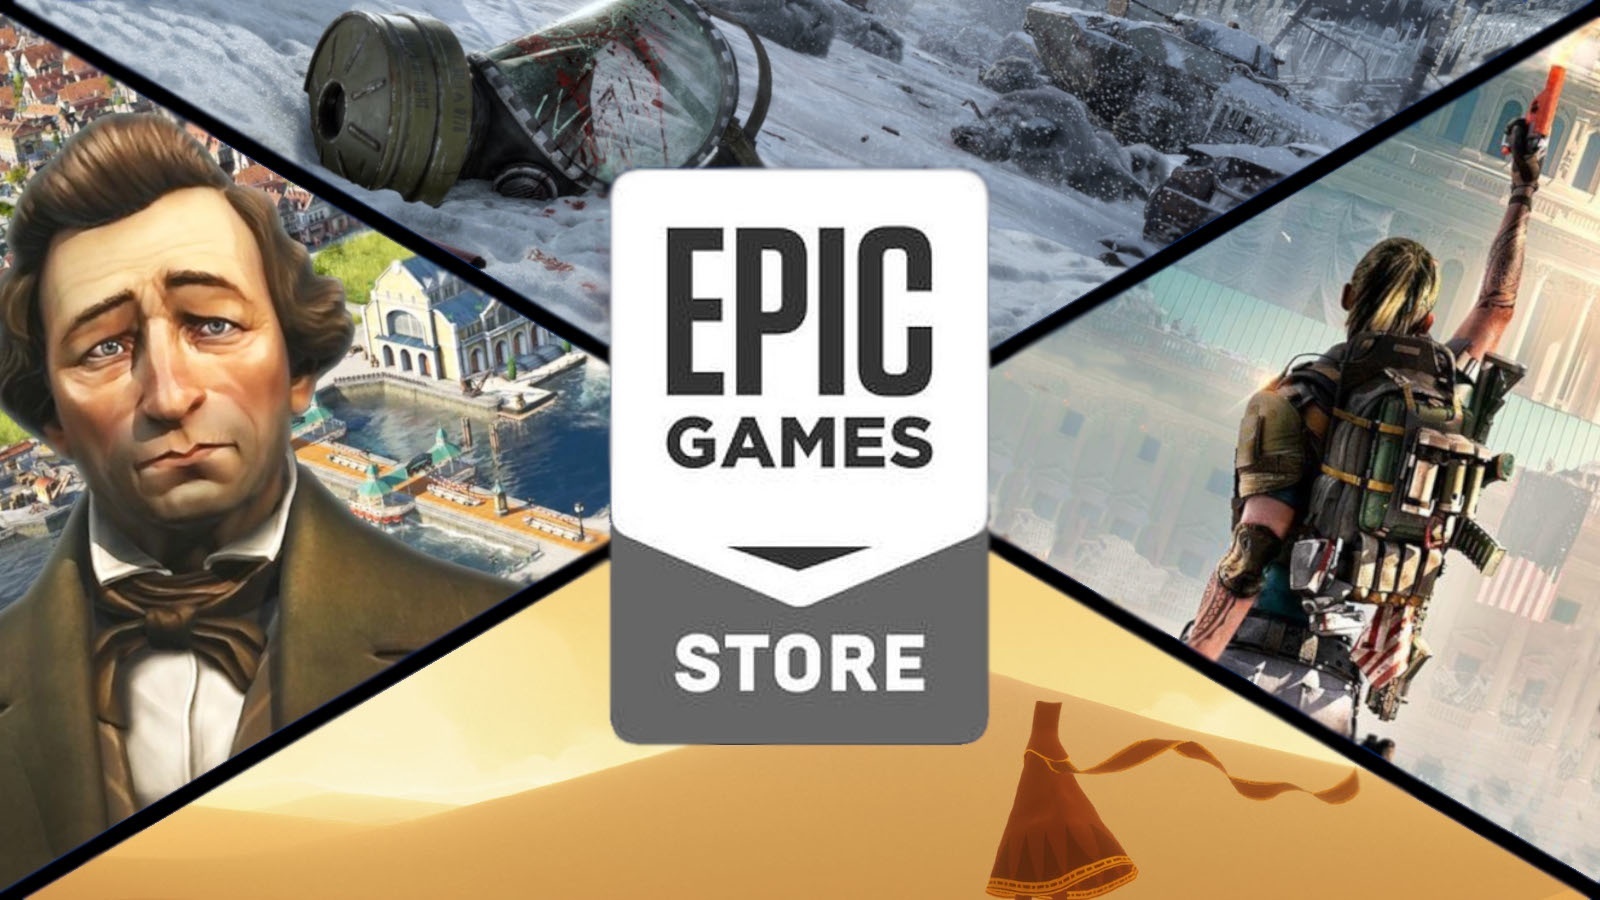 Epic Store makes a loss of 300 million, CEO sees it positively